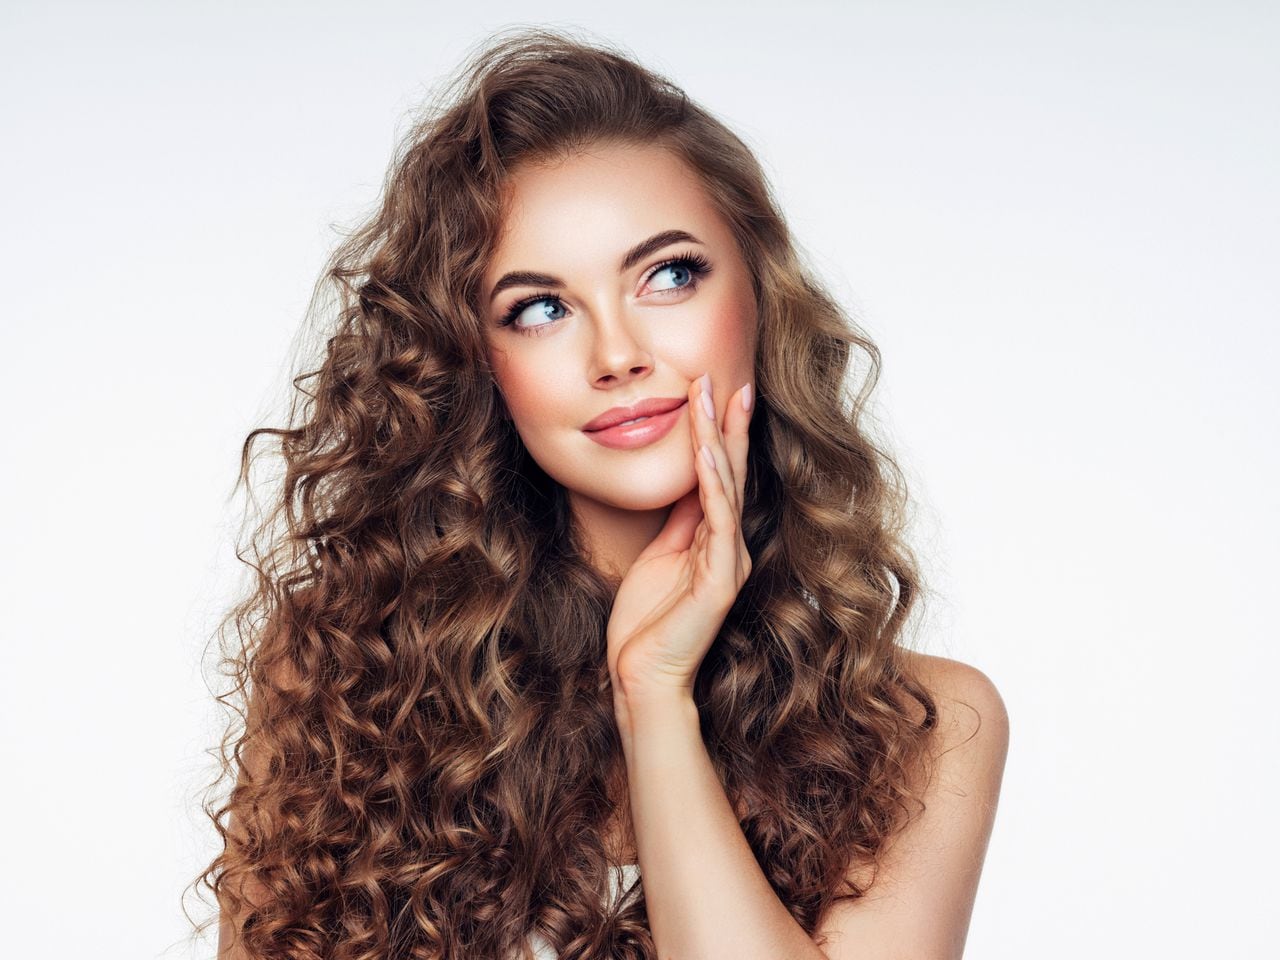 Young woman with brown voluminous and curly hair